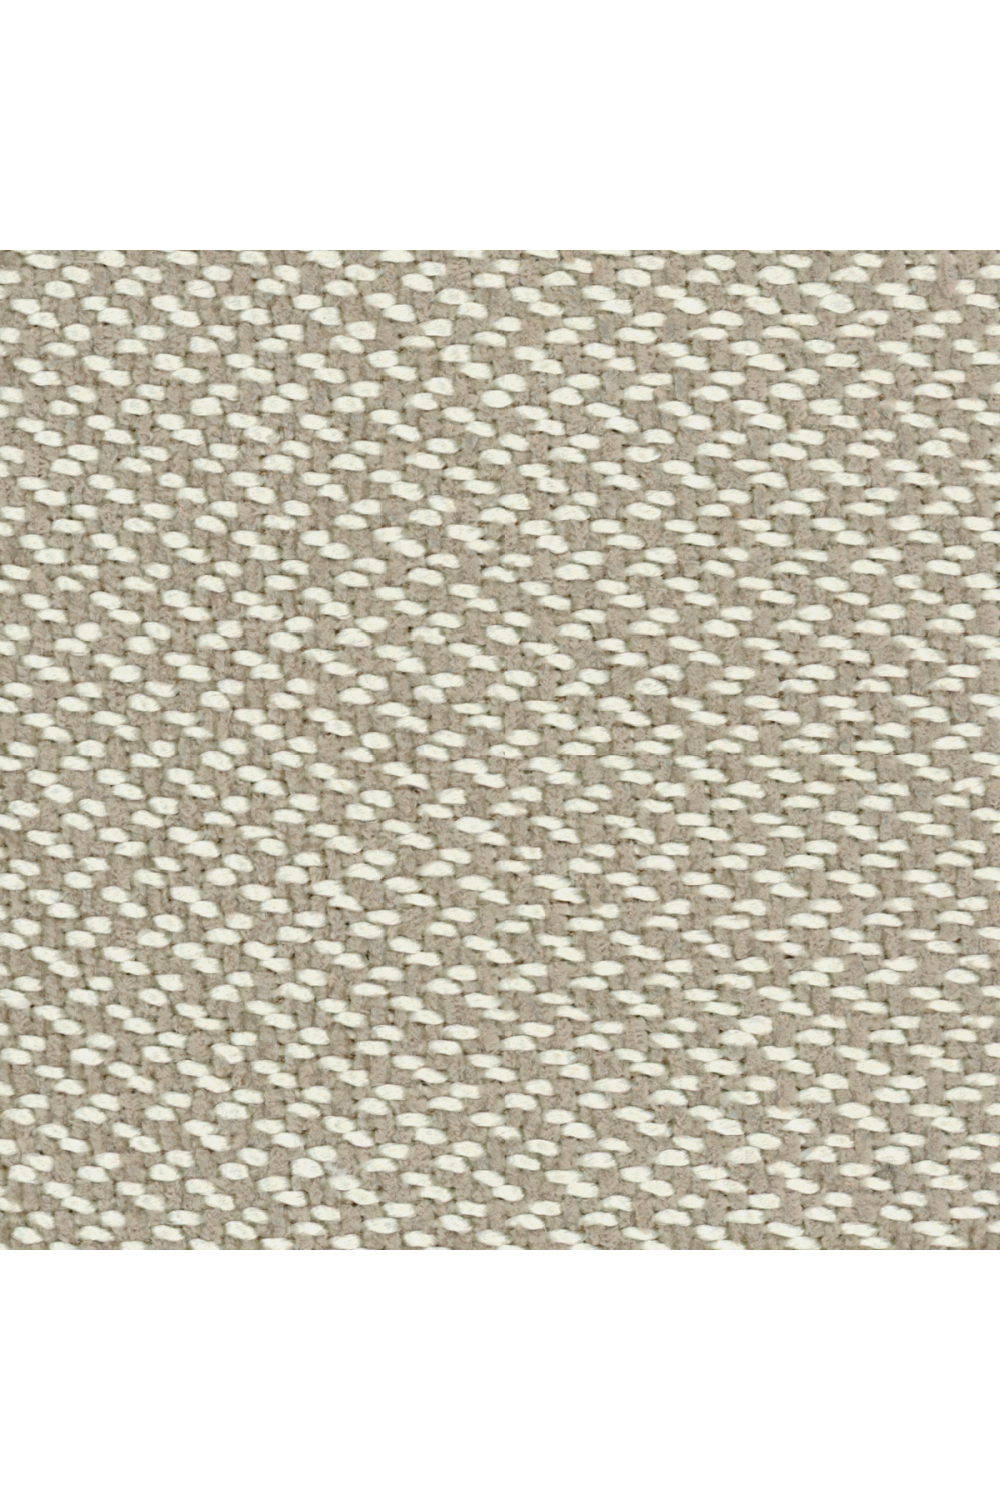 Neutral Tweed Side Chair (2) | Caracole Avondale | Oroa.com